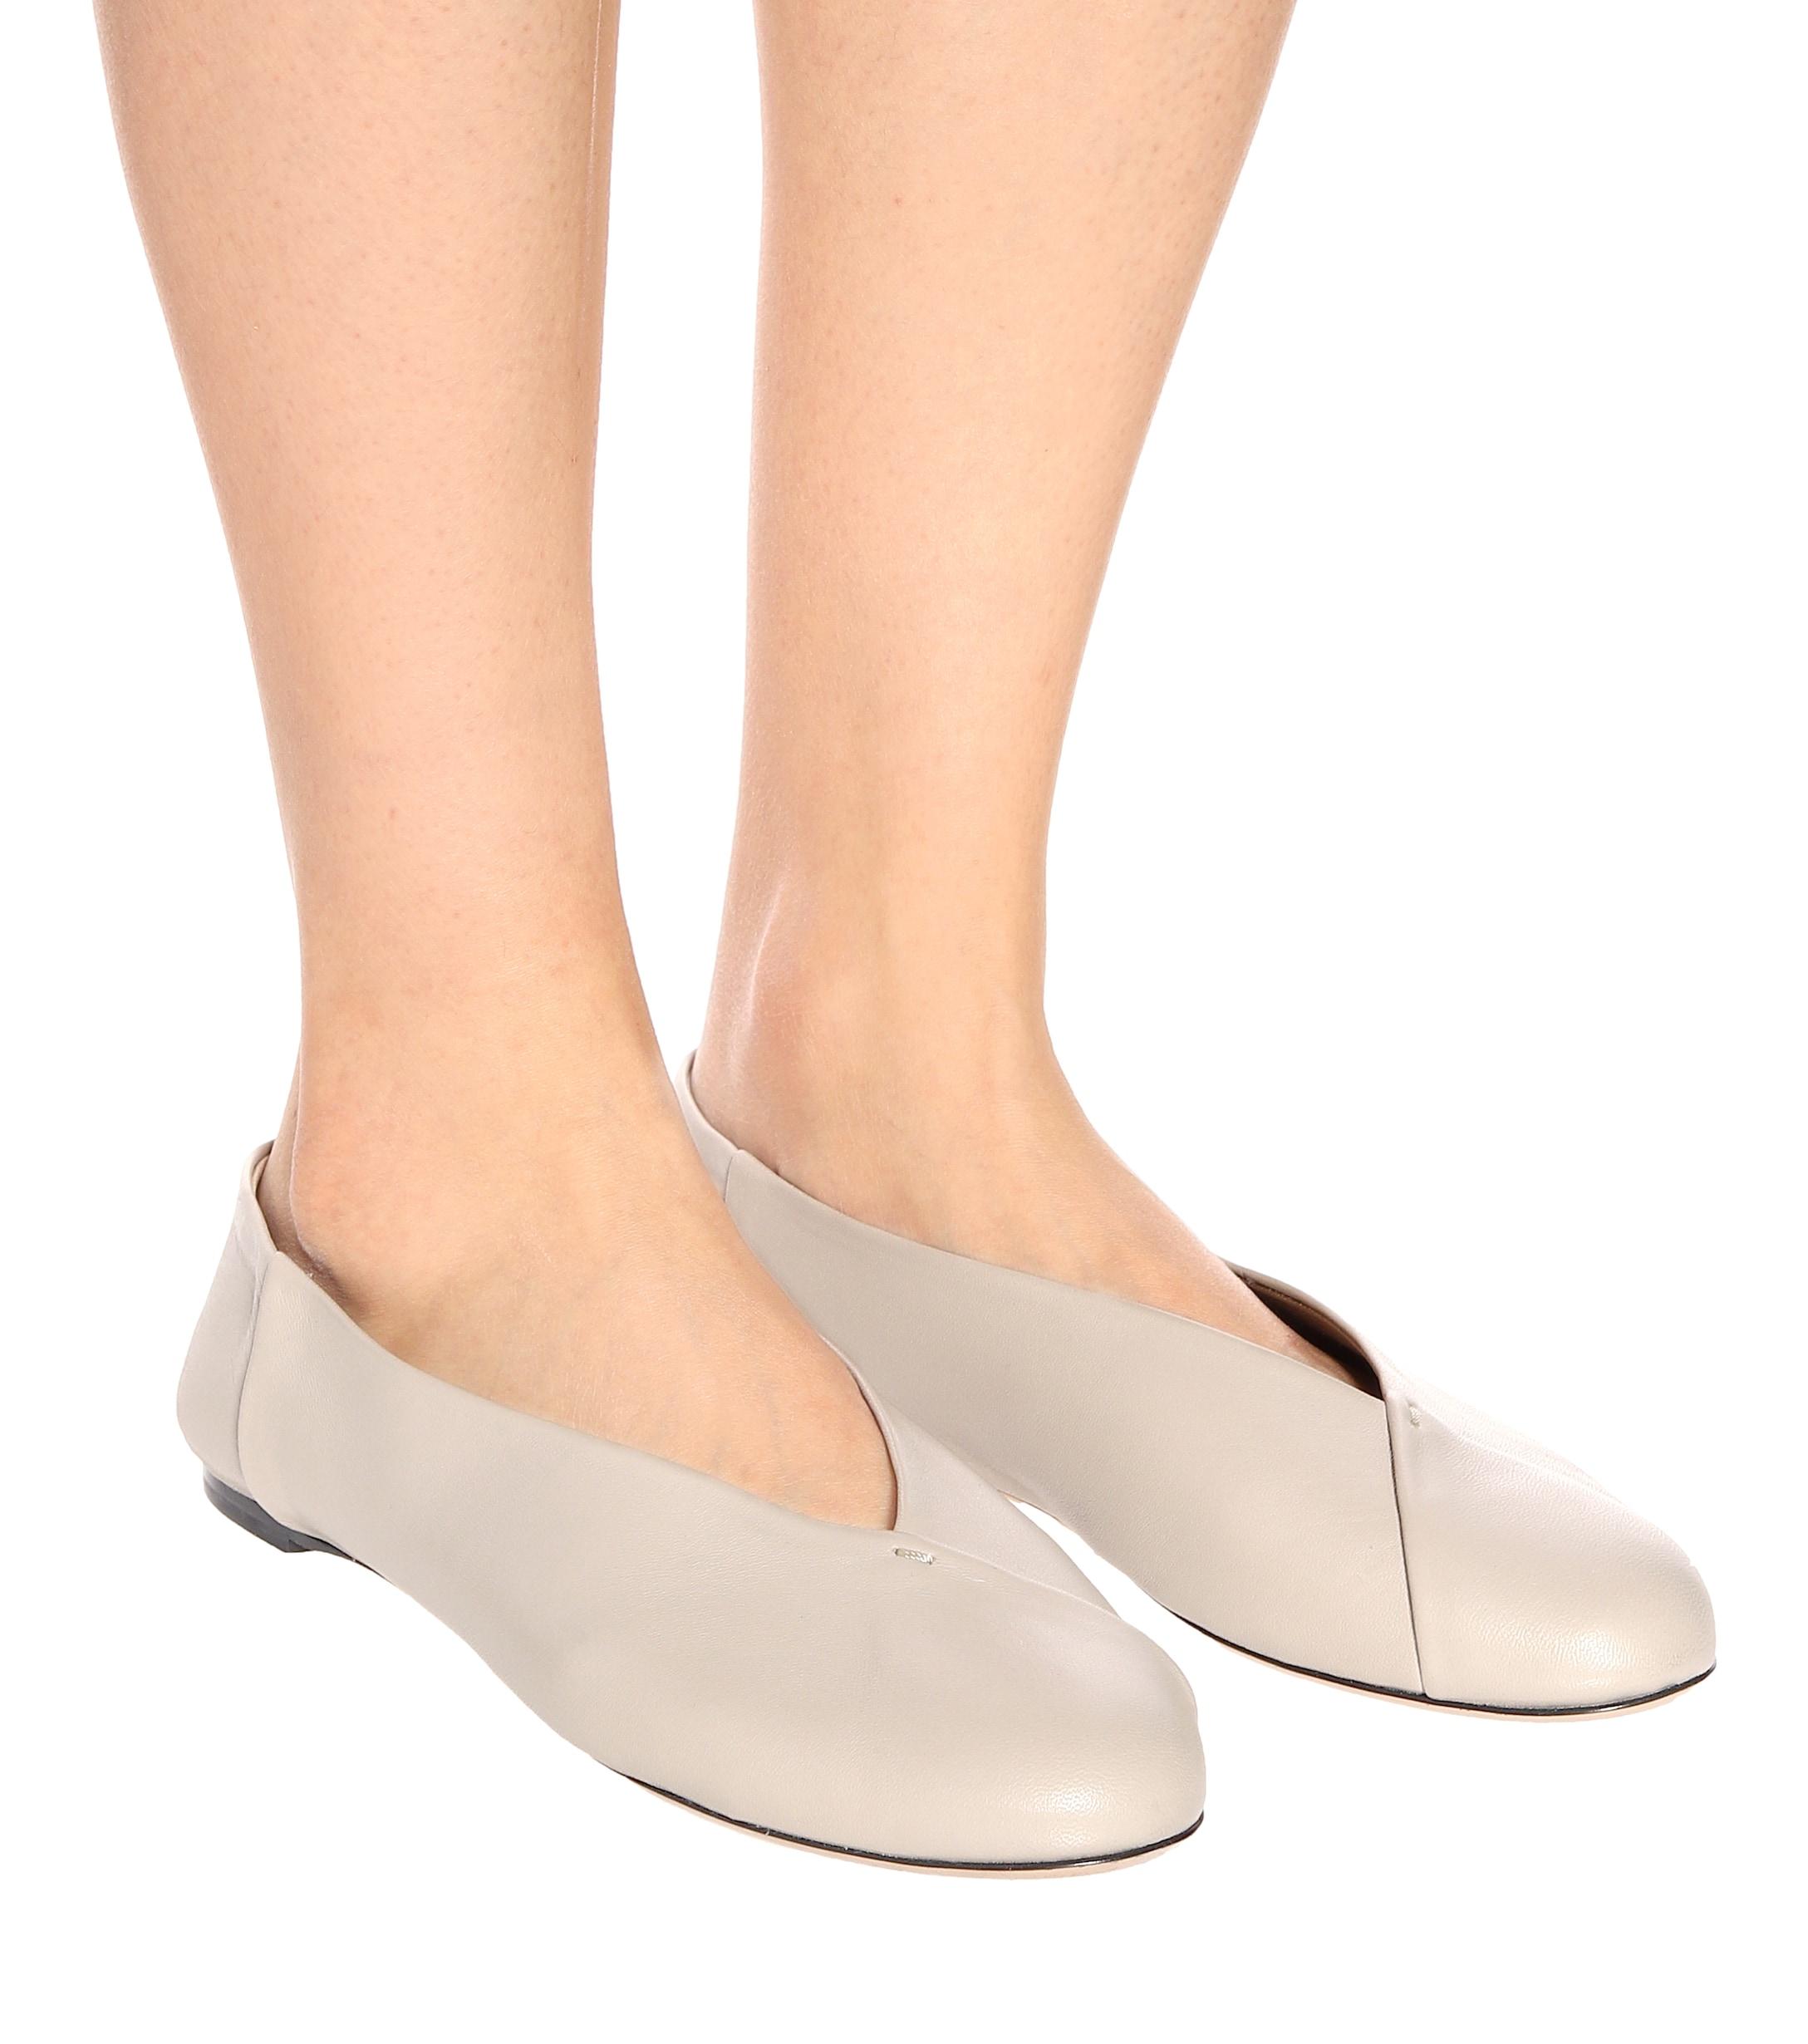 Max Mara Anne Leather Ballet Flats in Natural | Lyst